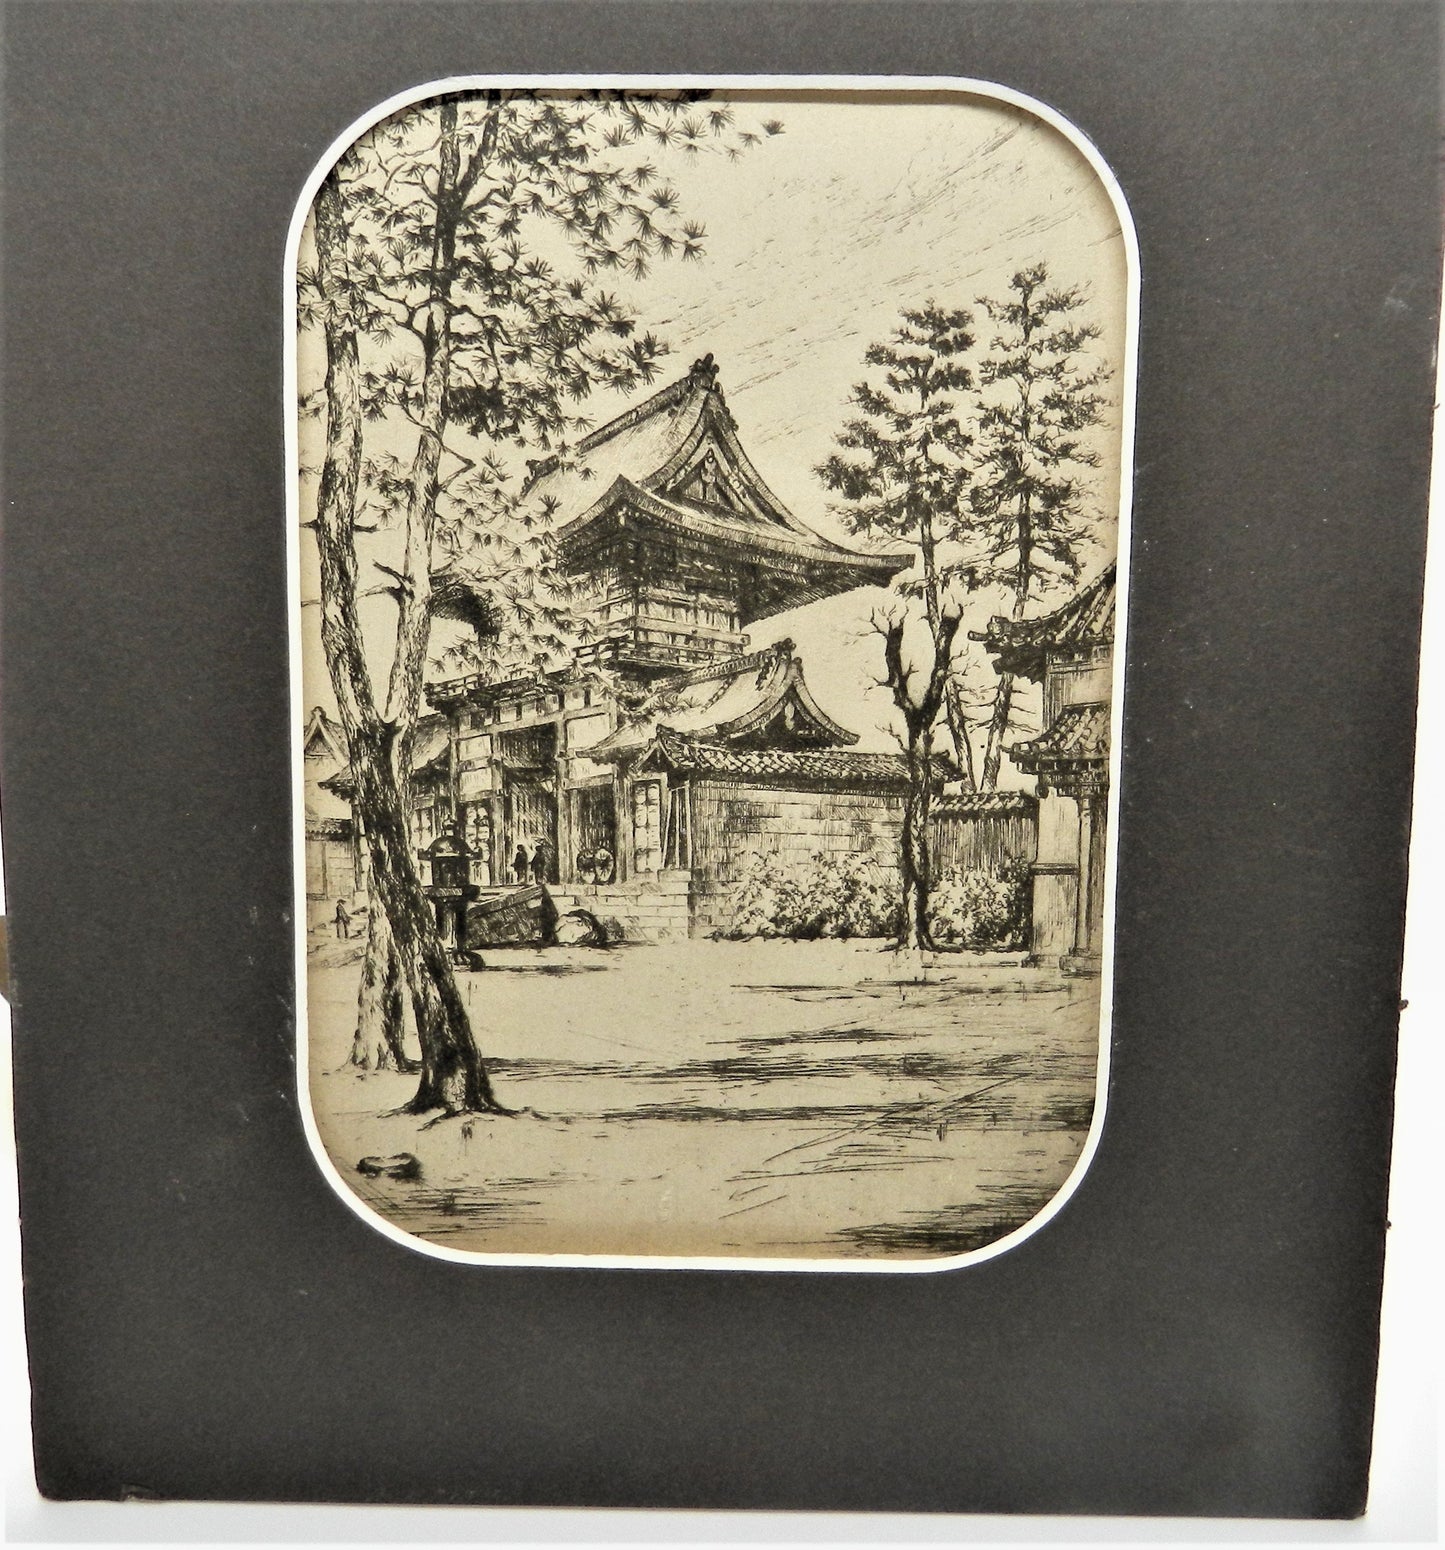 Vintage Original Etching Asian Temple and Trees - Matted 8x10